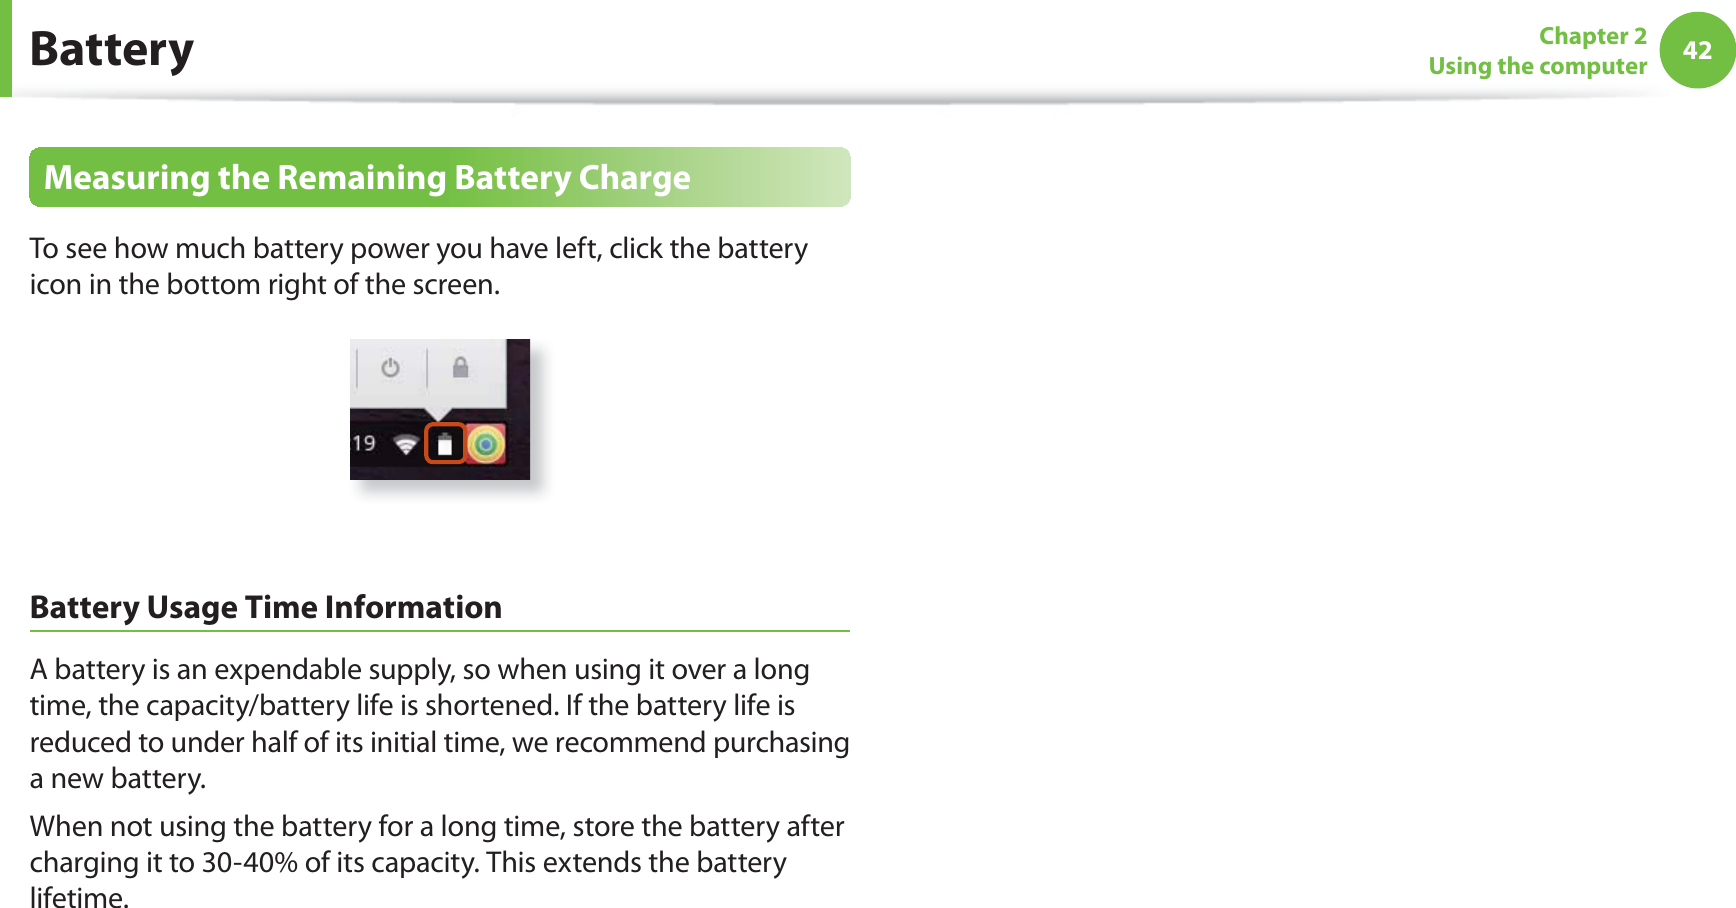 42Chapter 2Using the computerBatteryMeasuring the Remaining Battery ChargeTo see how much battery power you have left, click the battery icon in the bottom right of the screen.Battery Usage Time InformationA battery is an expendable supply, so when using it over a long time, the capacity/battery life is shortened. If the battery life is reduced to under half of its initial time, we recommend purchasing a new battery.When not using the battery for a long time, store the battery after charging it to 30-40% of its capacity. This extends the battery lifetime.